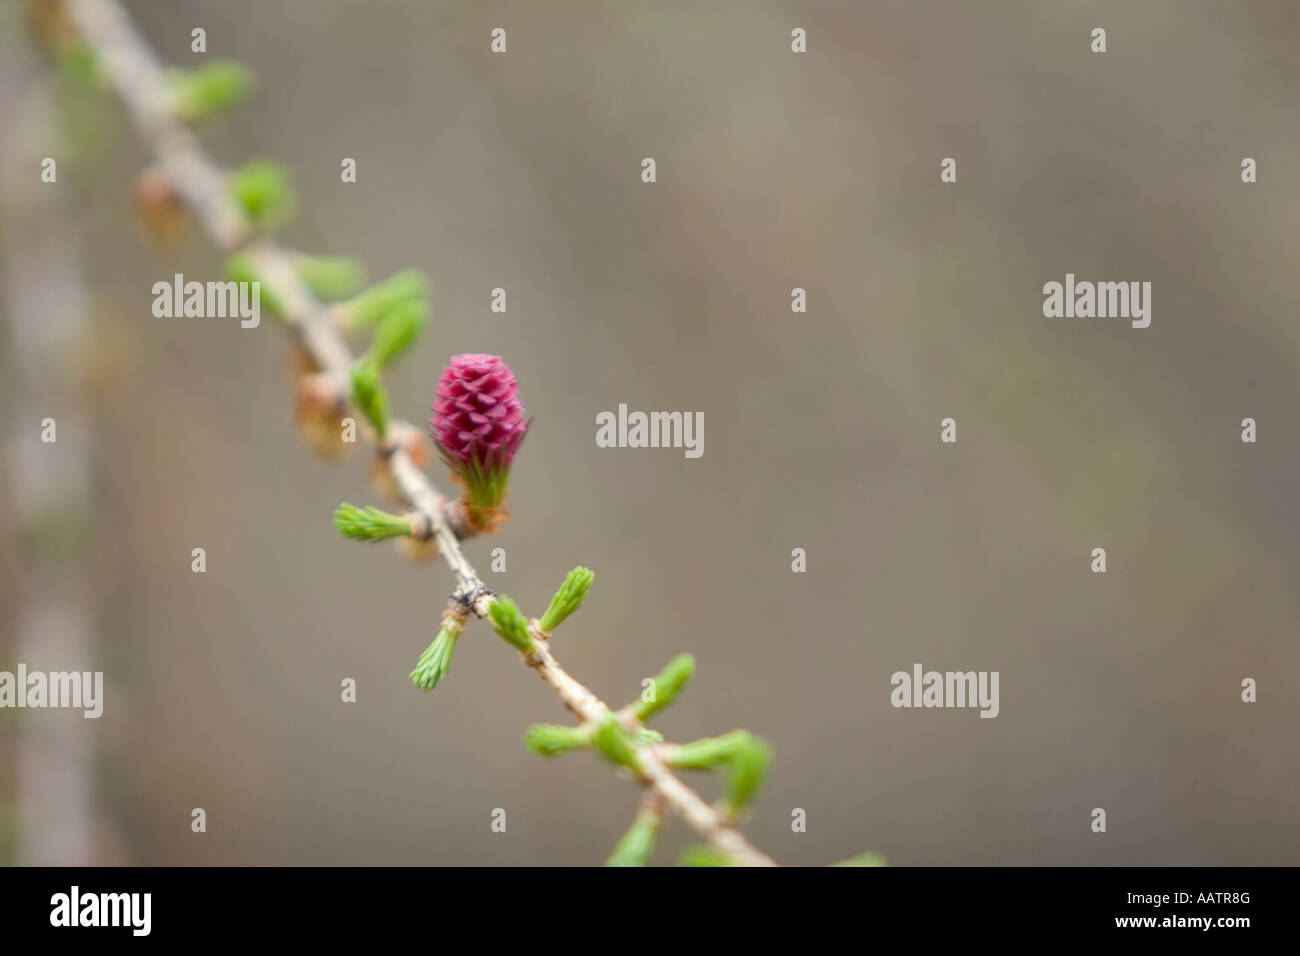 Fruit or flower of the Larch tree, Larix. Italy, Europe Stock Photo